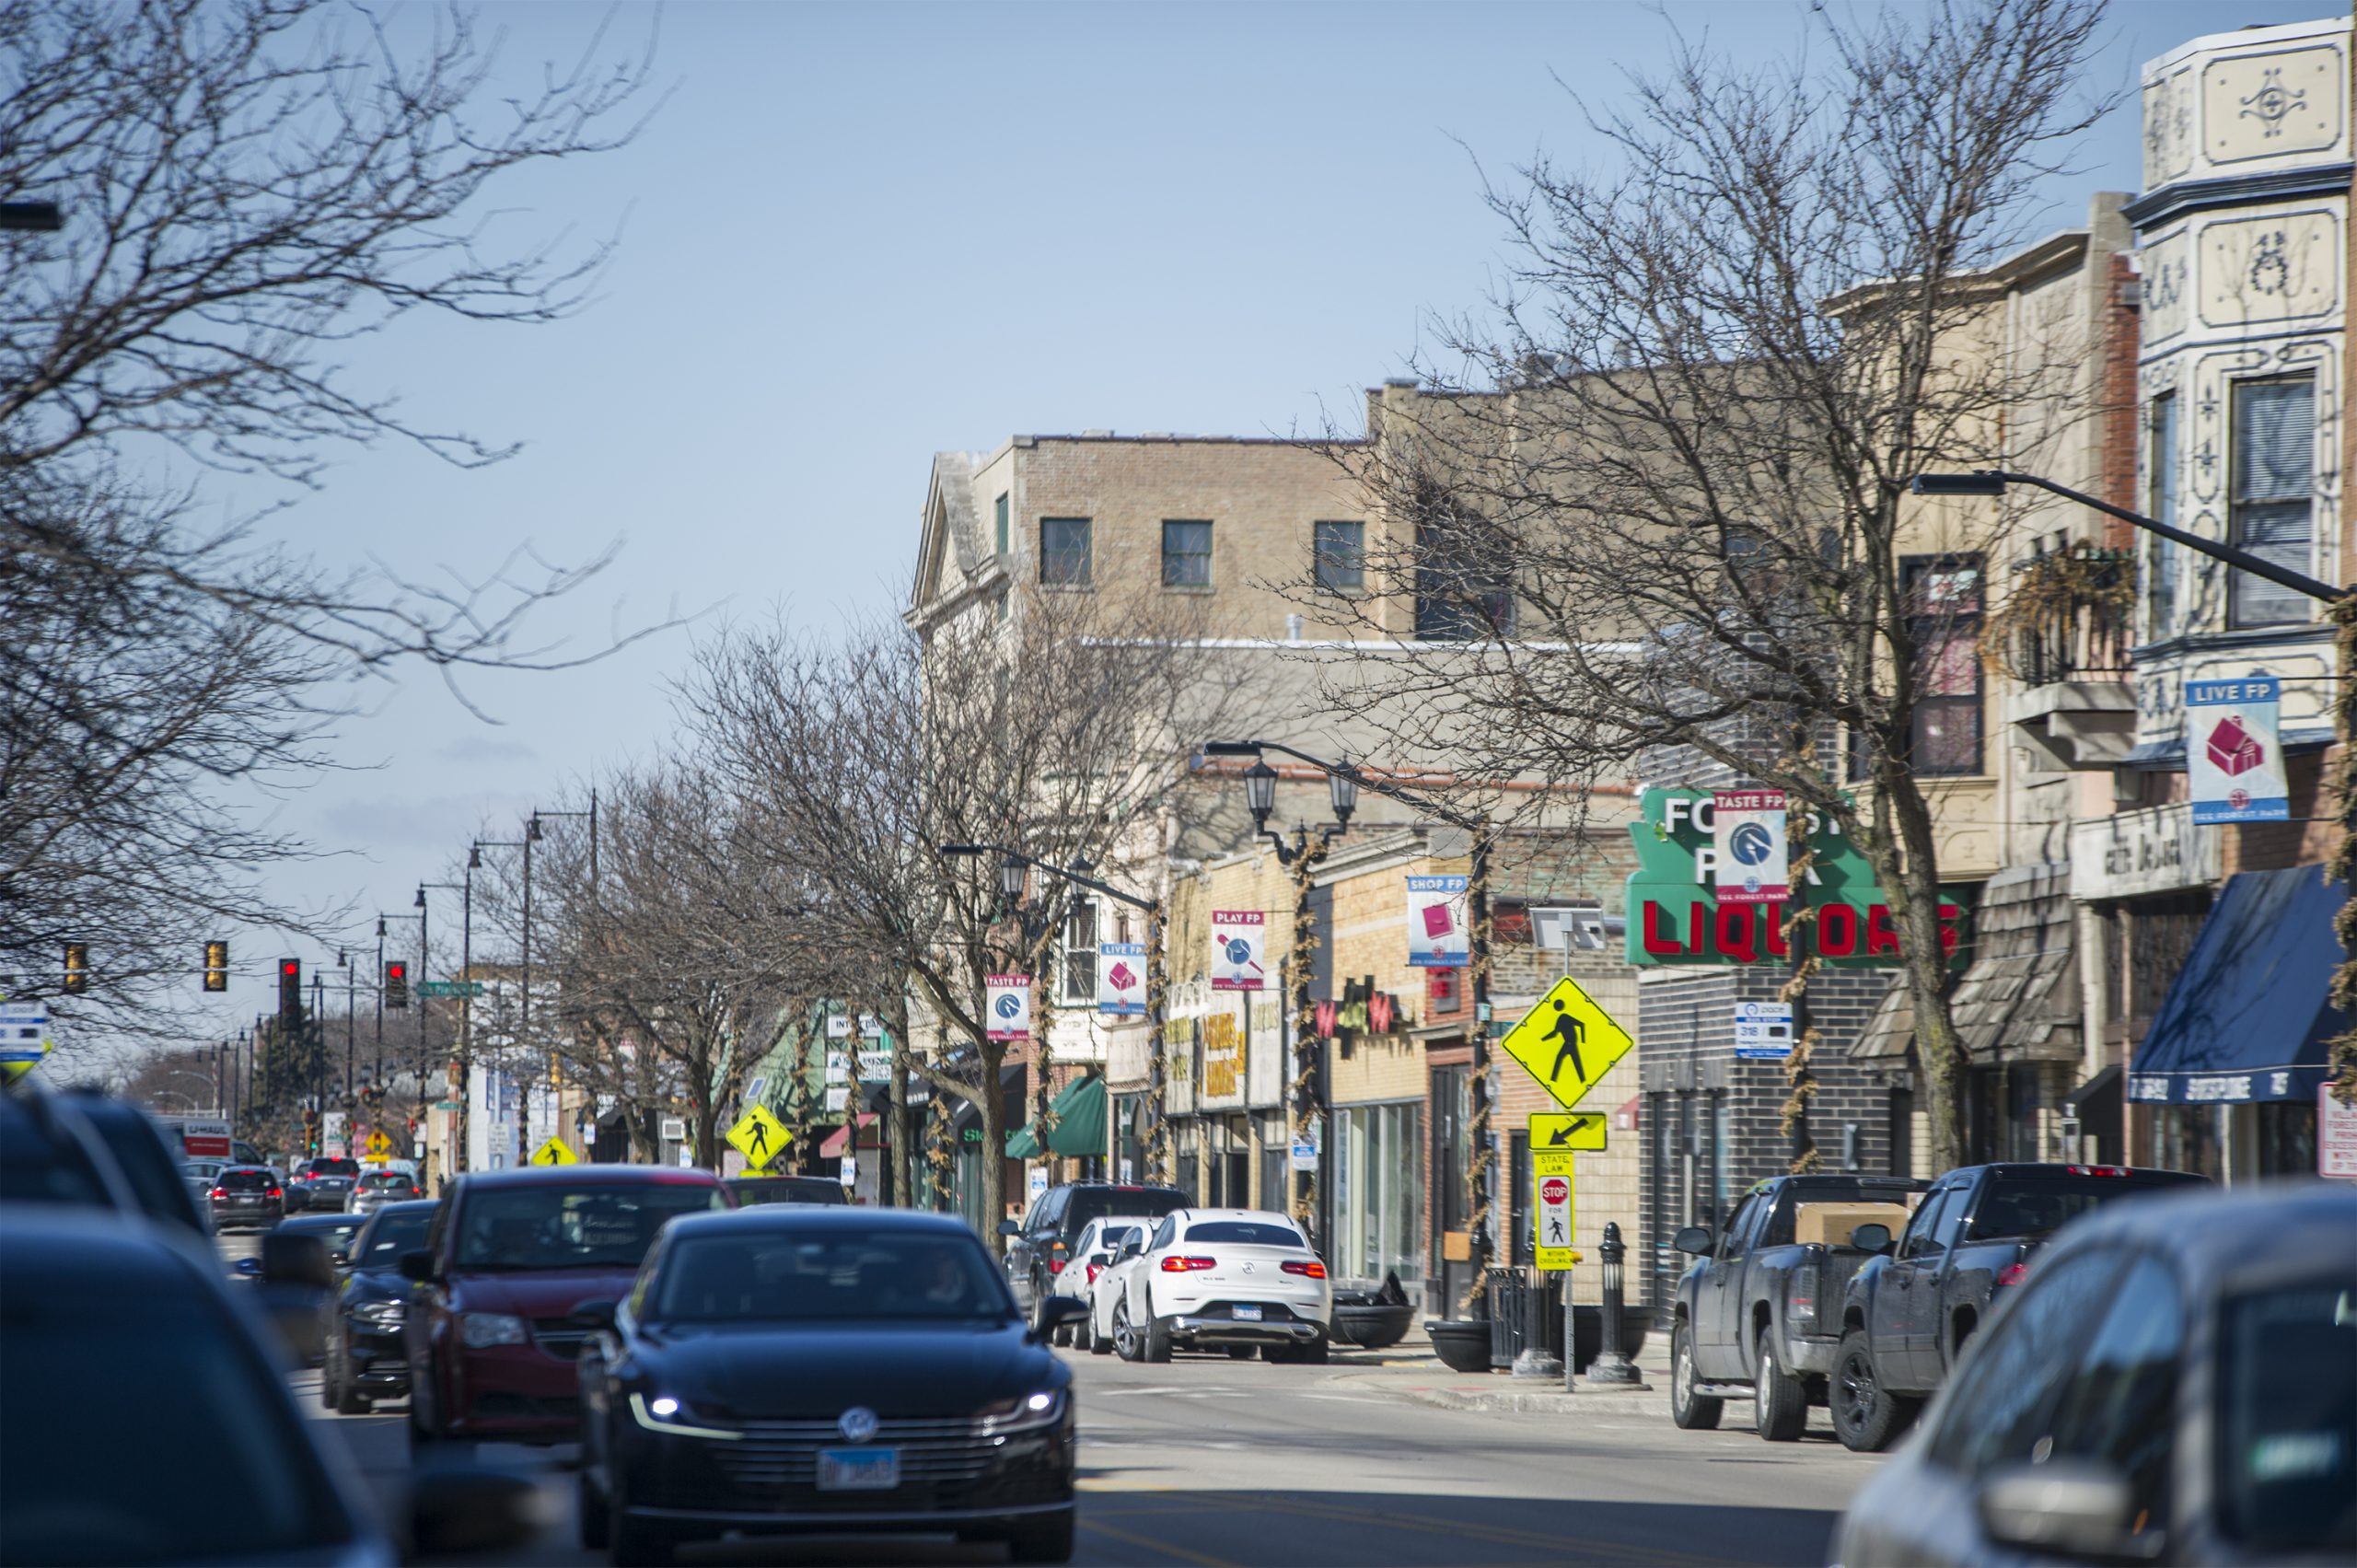 Madison Street may get $500K streetscape makeover